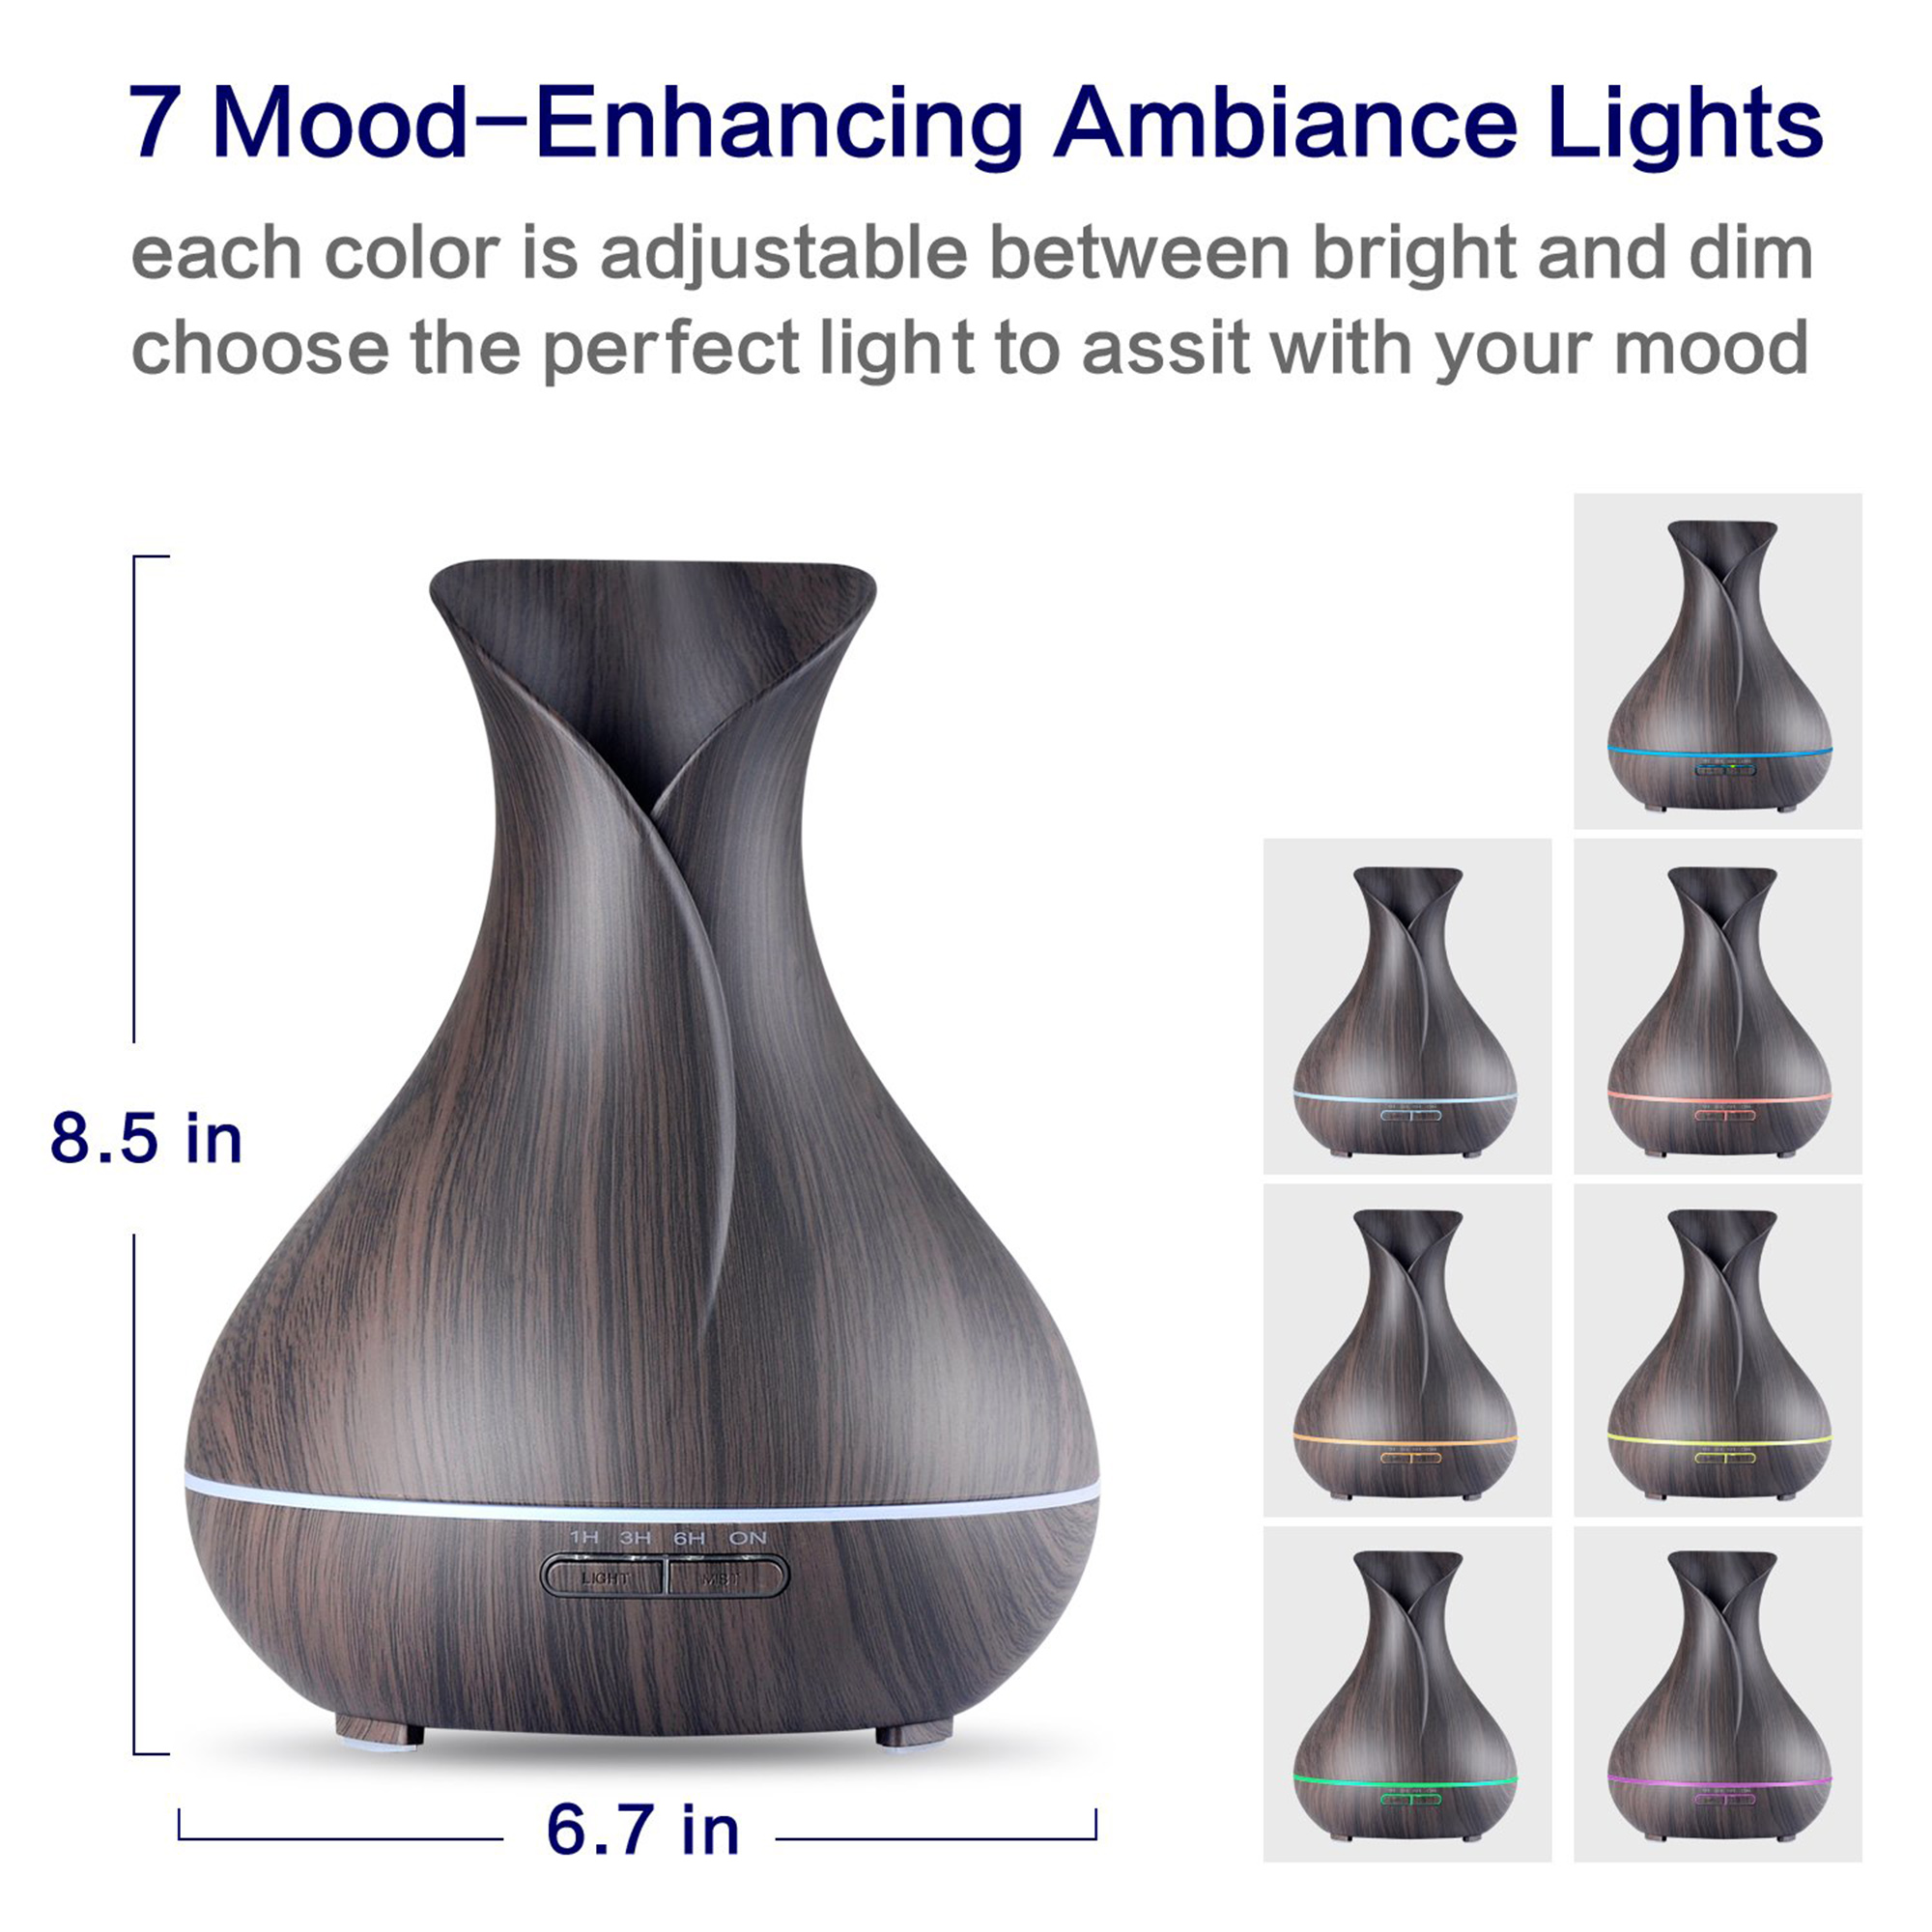 400ml Essential Oil Diffuser Wood Grain Ultrasonic Aromatherapy Cool Mist Humidifiers, 7 Lights 4 Timer by AGPtek - image 2 of 7